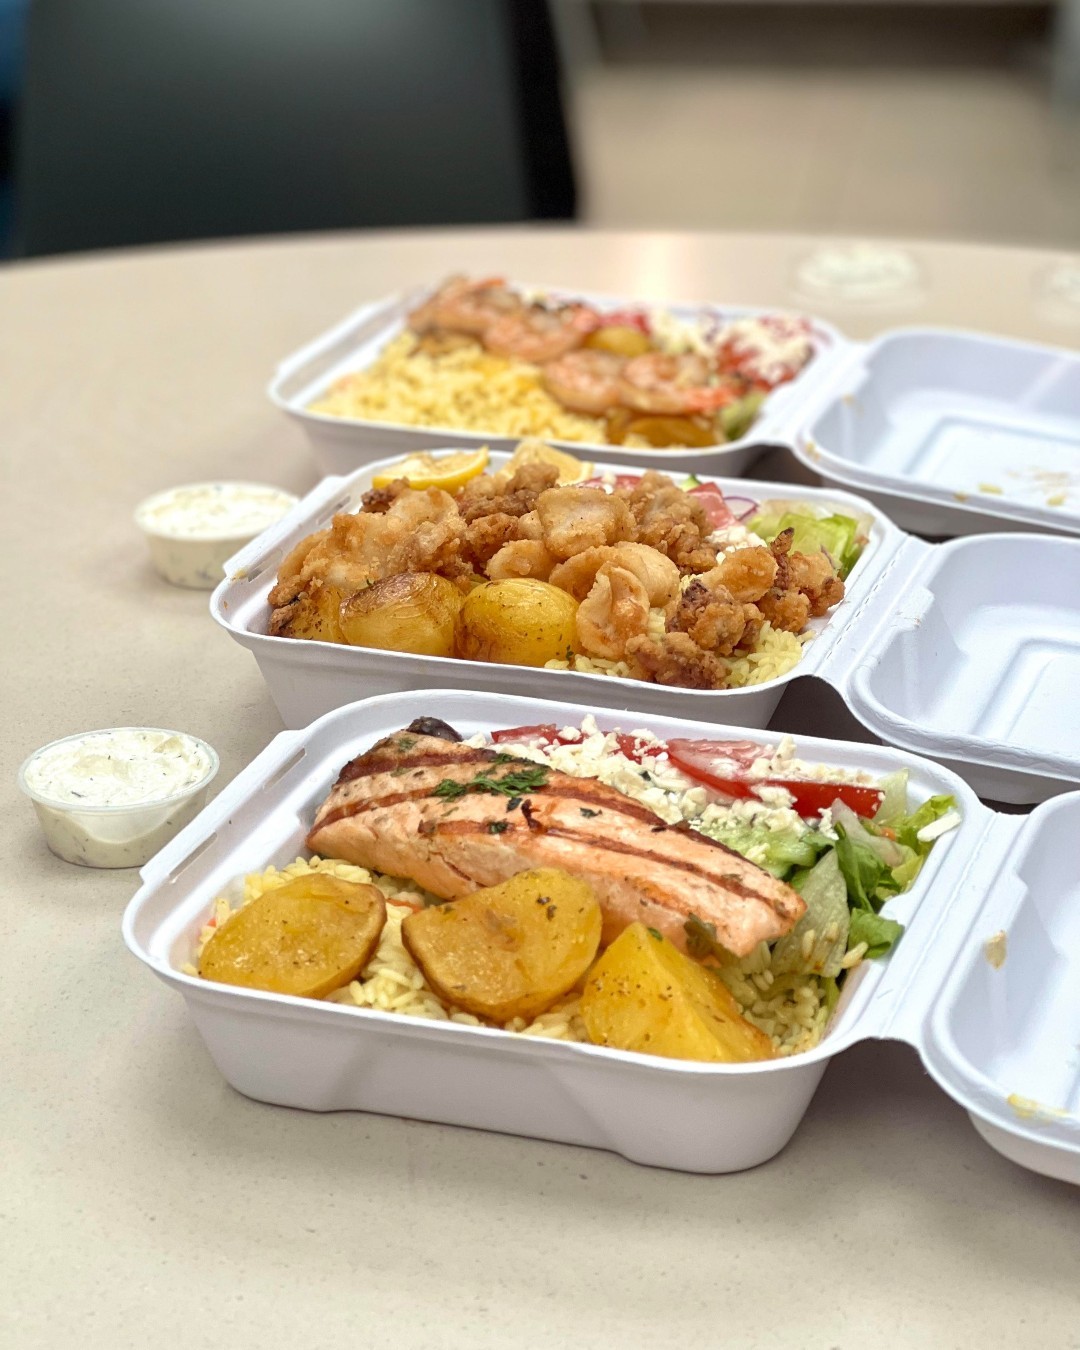 Takeout containers with rice, potatoes, and salmon from Jimmy the Greek